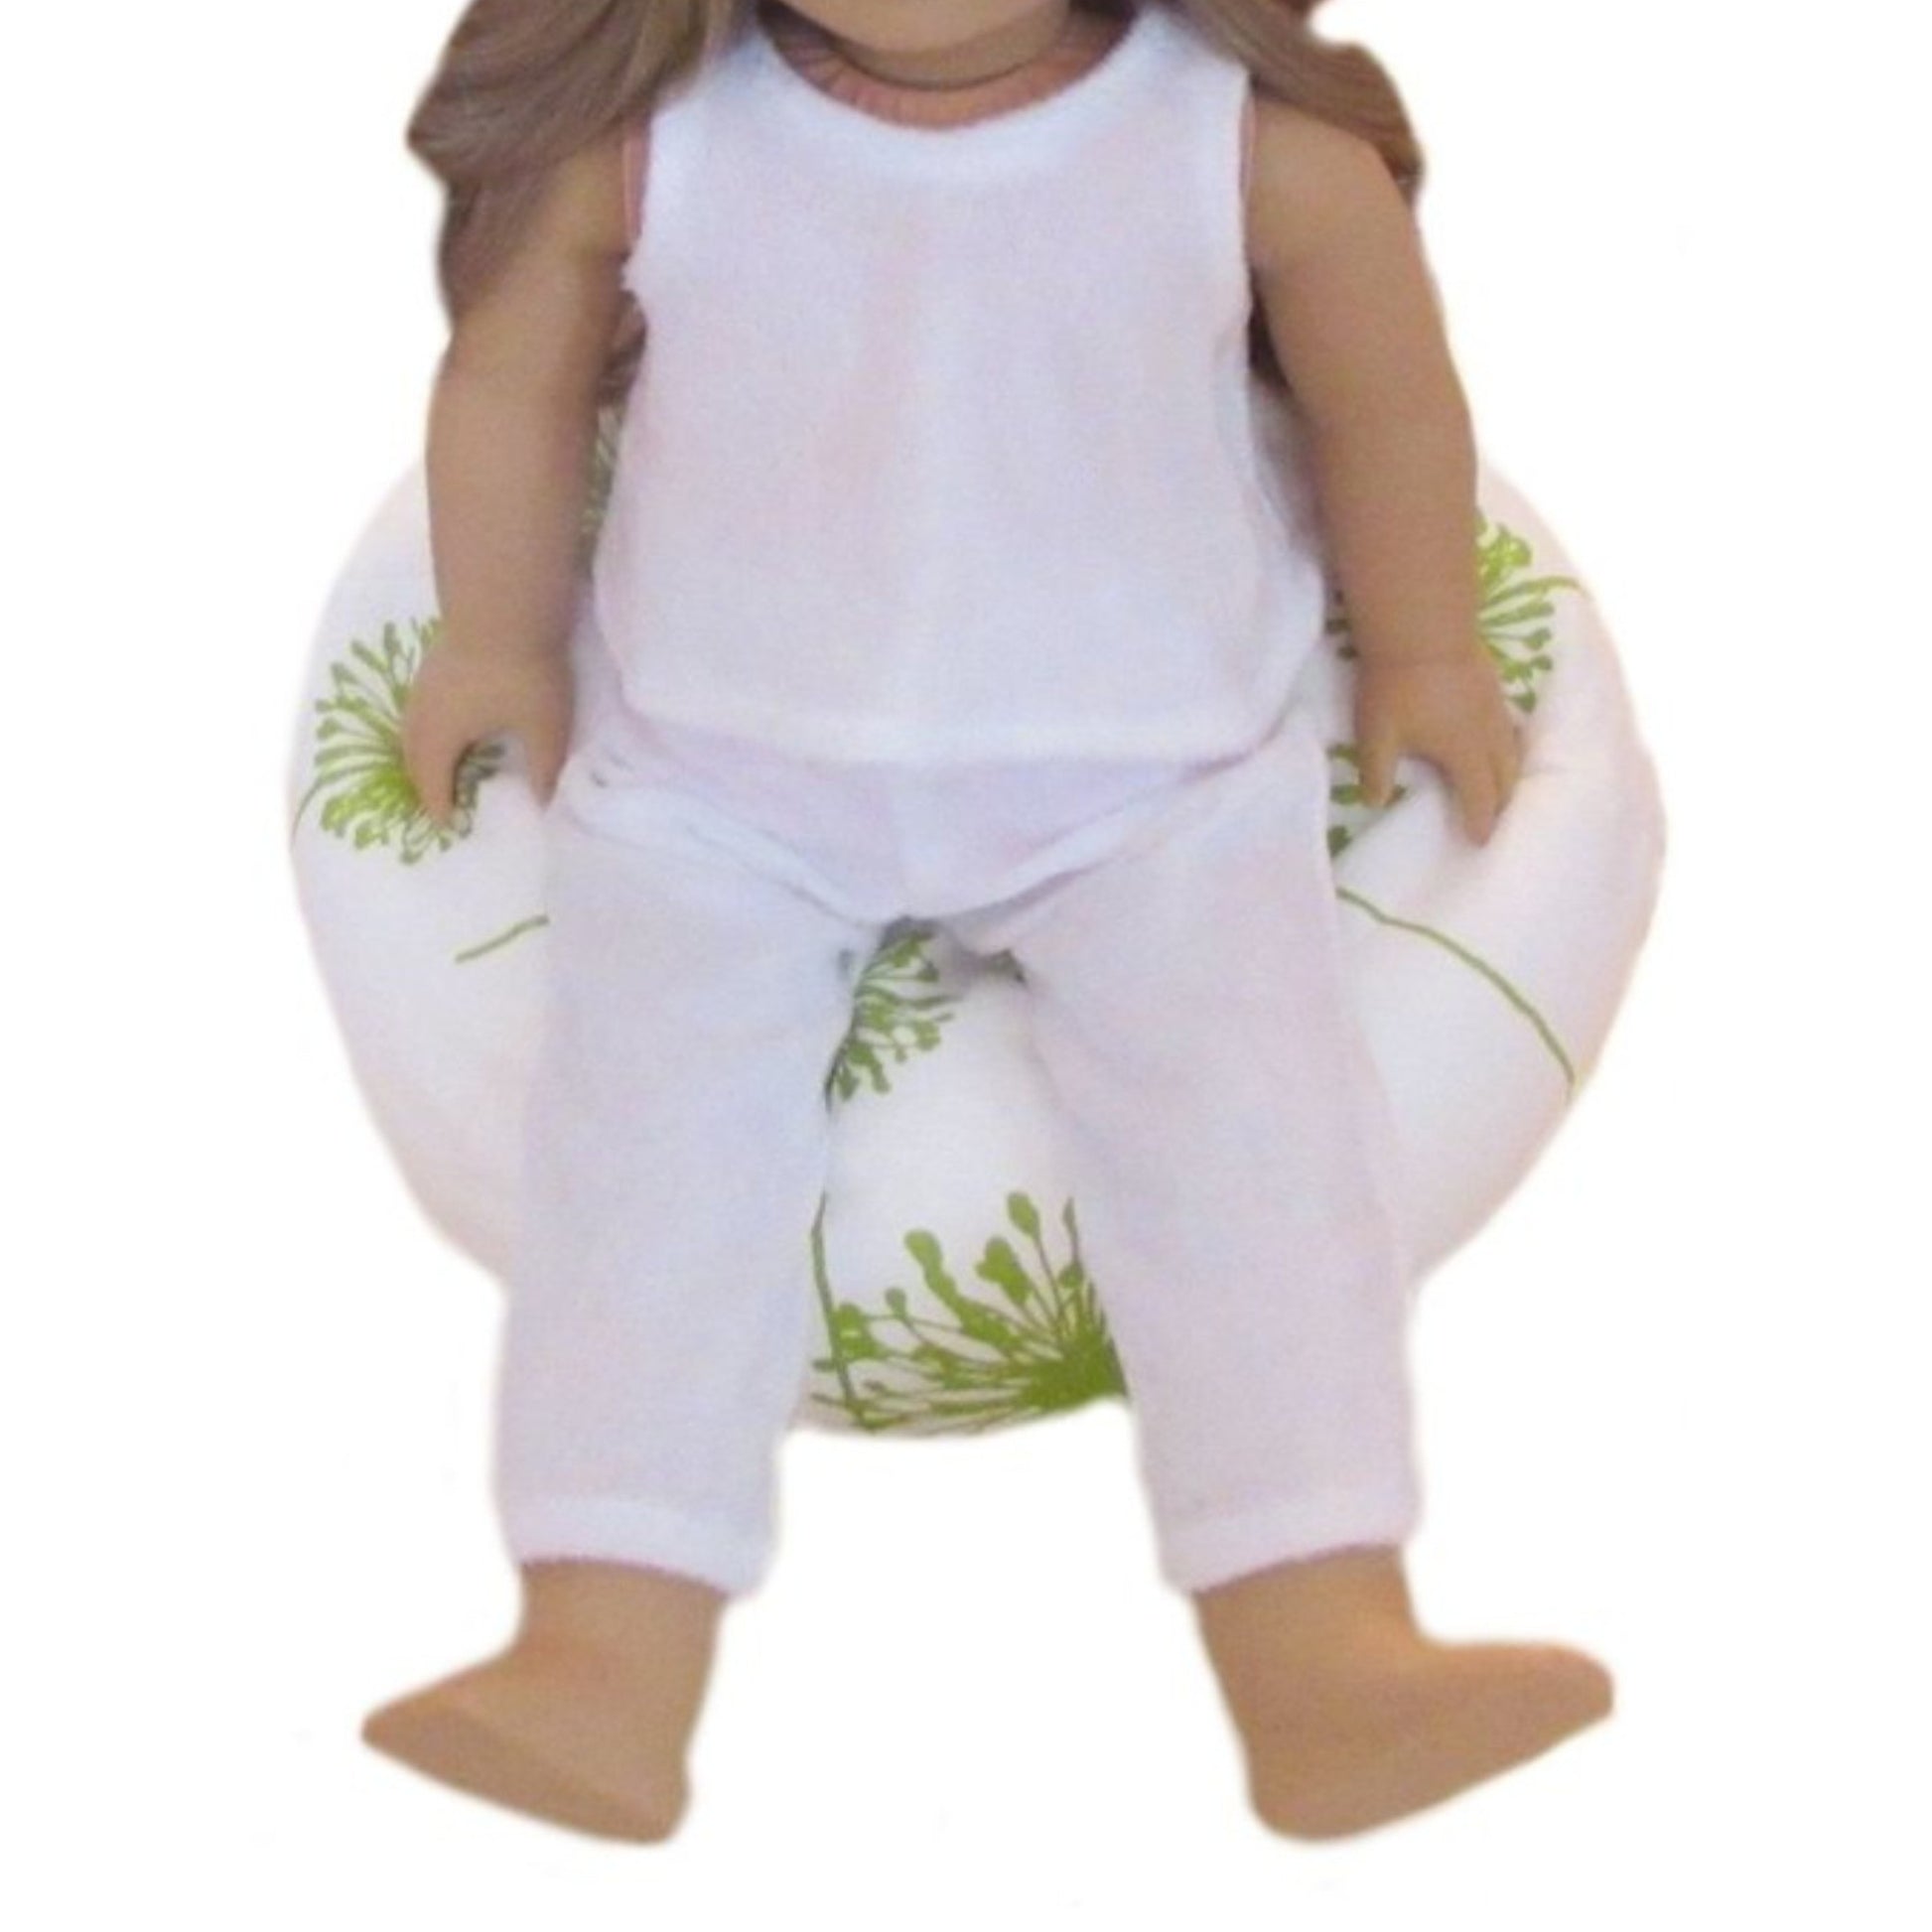 Chartreuse Dandelion Doll Bean Bag Chair for 18-inch dolls with doll